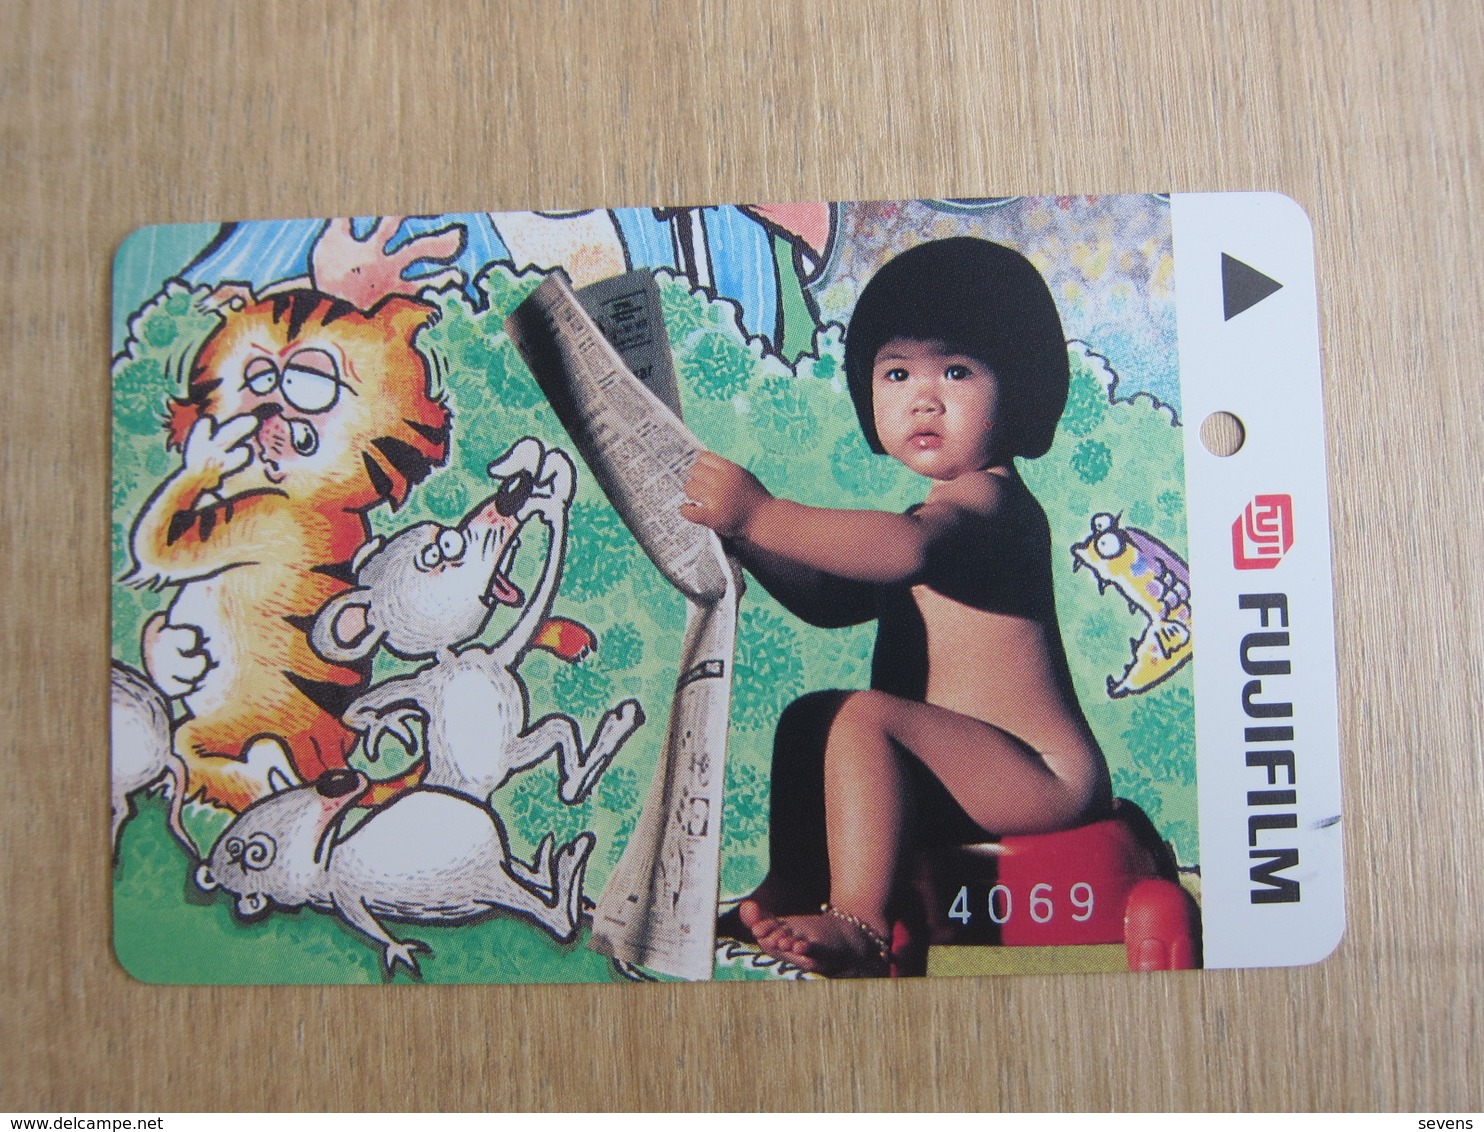 Transitlink Adult Fare Metro Ticket,Fuji Film, Baby And Cartoon Cat And Rats Painting - Singapur